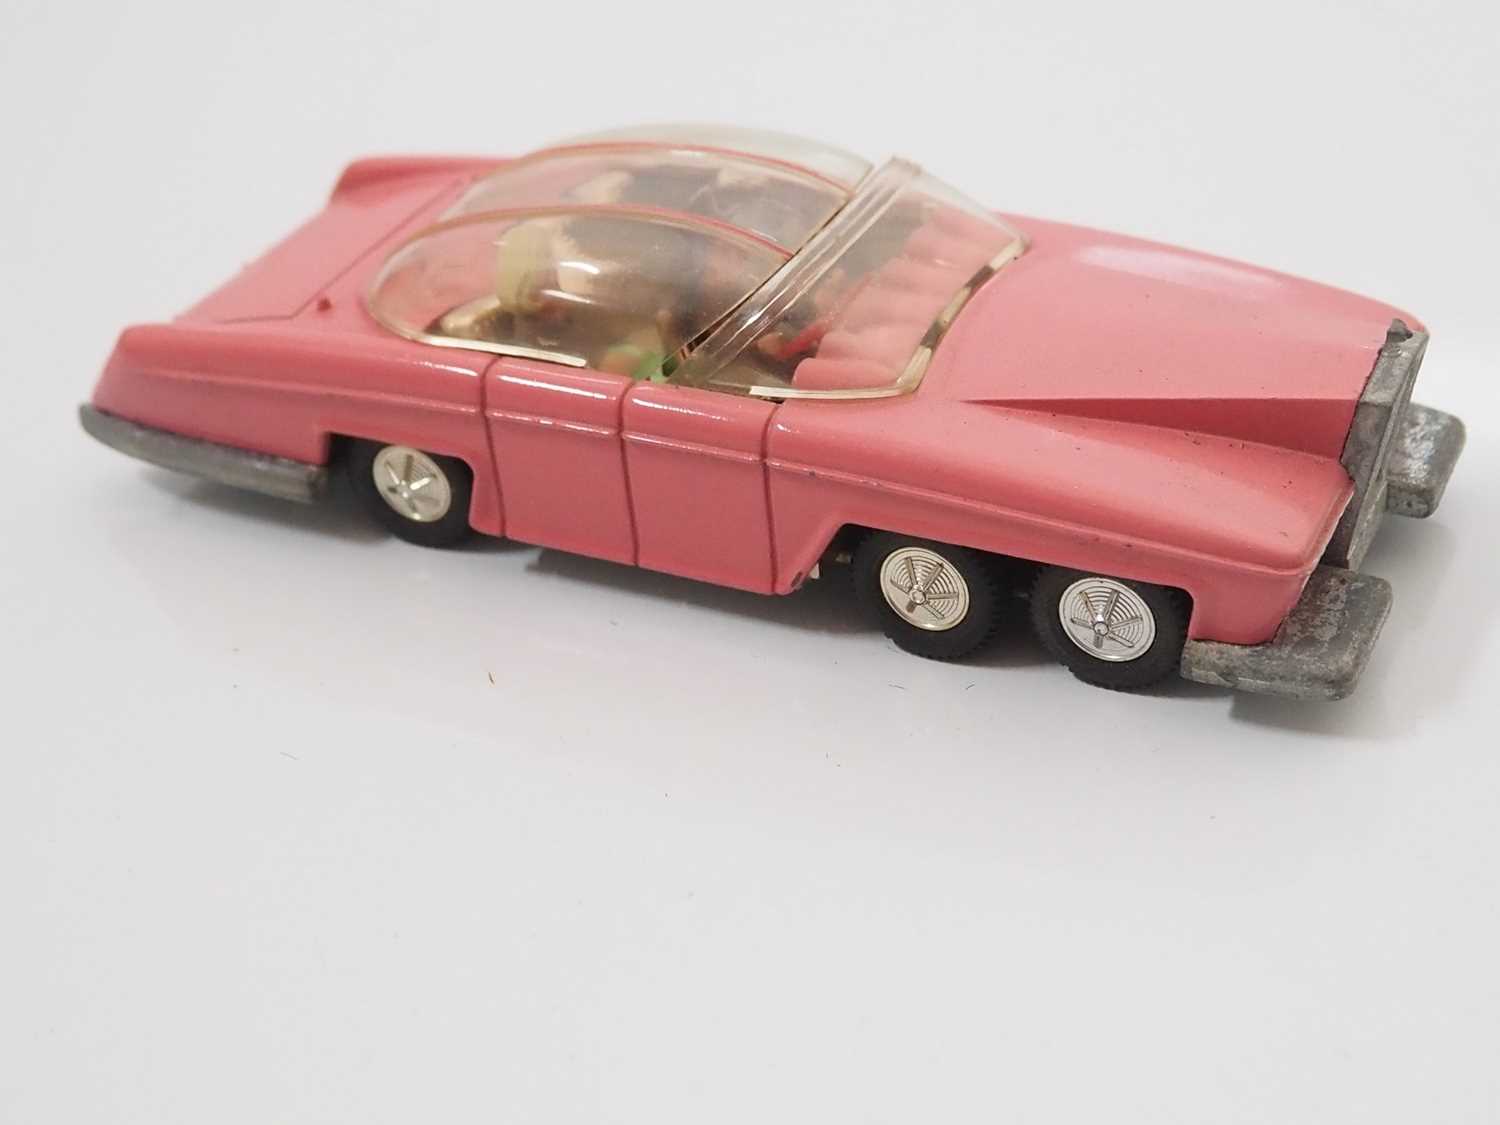 A DINKY 100 diecast 'Gerry Anderson's Thunderbirds' Lady Penelope's FAB1 Rolls Royce in pink, - Image 3 of 5